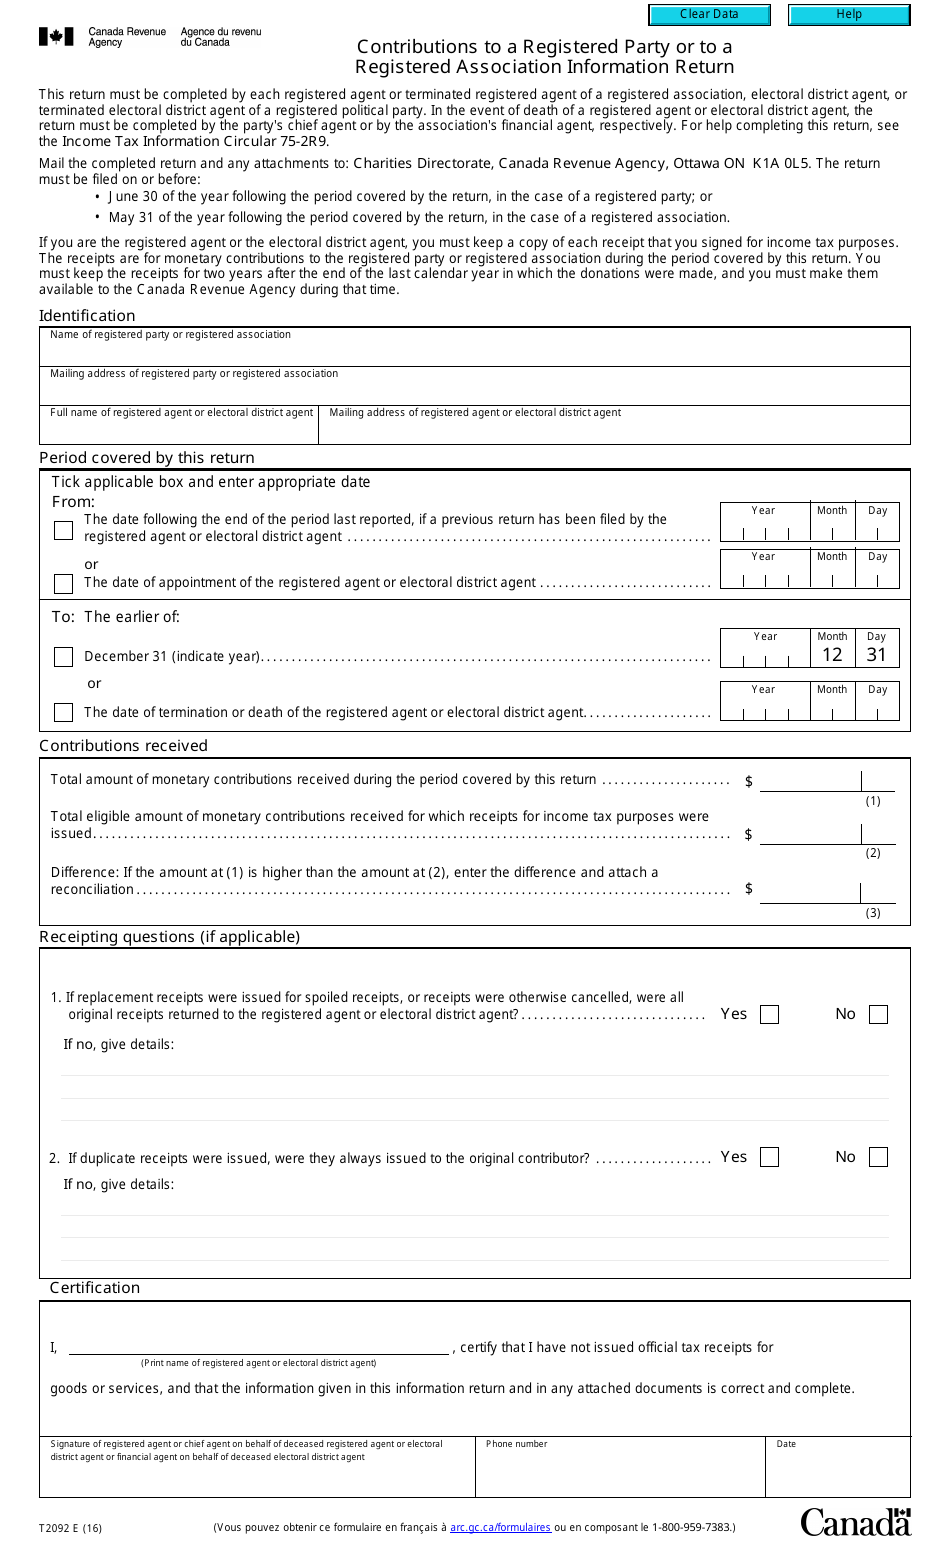 Form T2092 Contributions to a Registered Party or to a Registered Association Information Return - Canada, Page 1